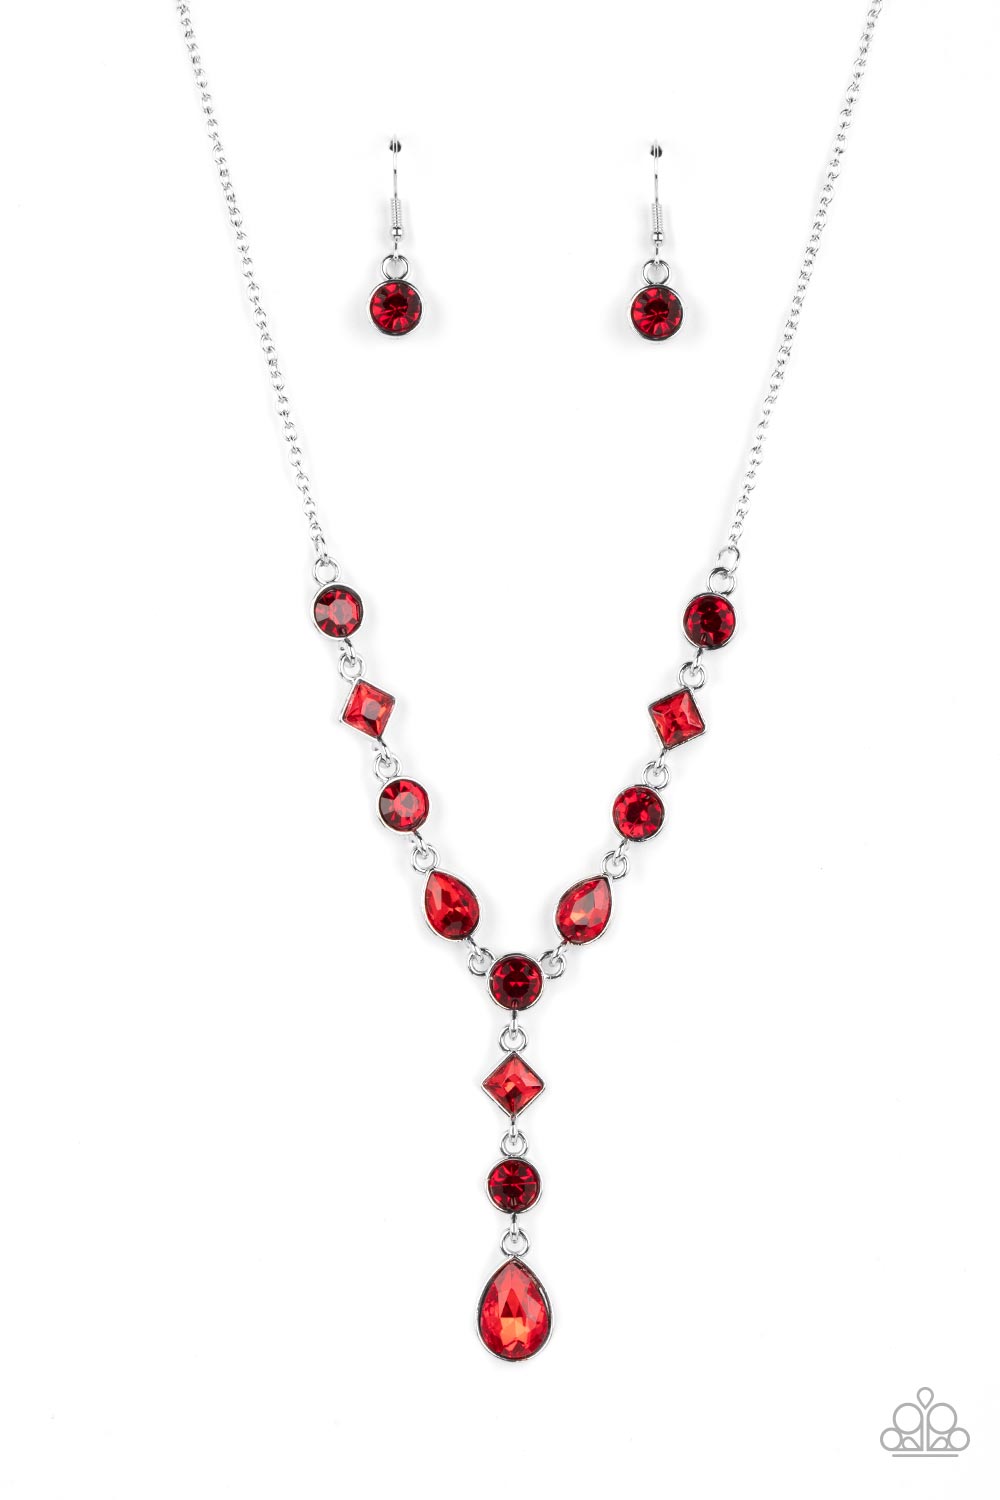 Forget the Crown Red Rhinestone Necklace - Paparazzi Accessories- lightbox - CarasShop.com - $5 Jewelry by Cara Jewels